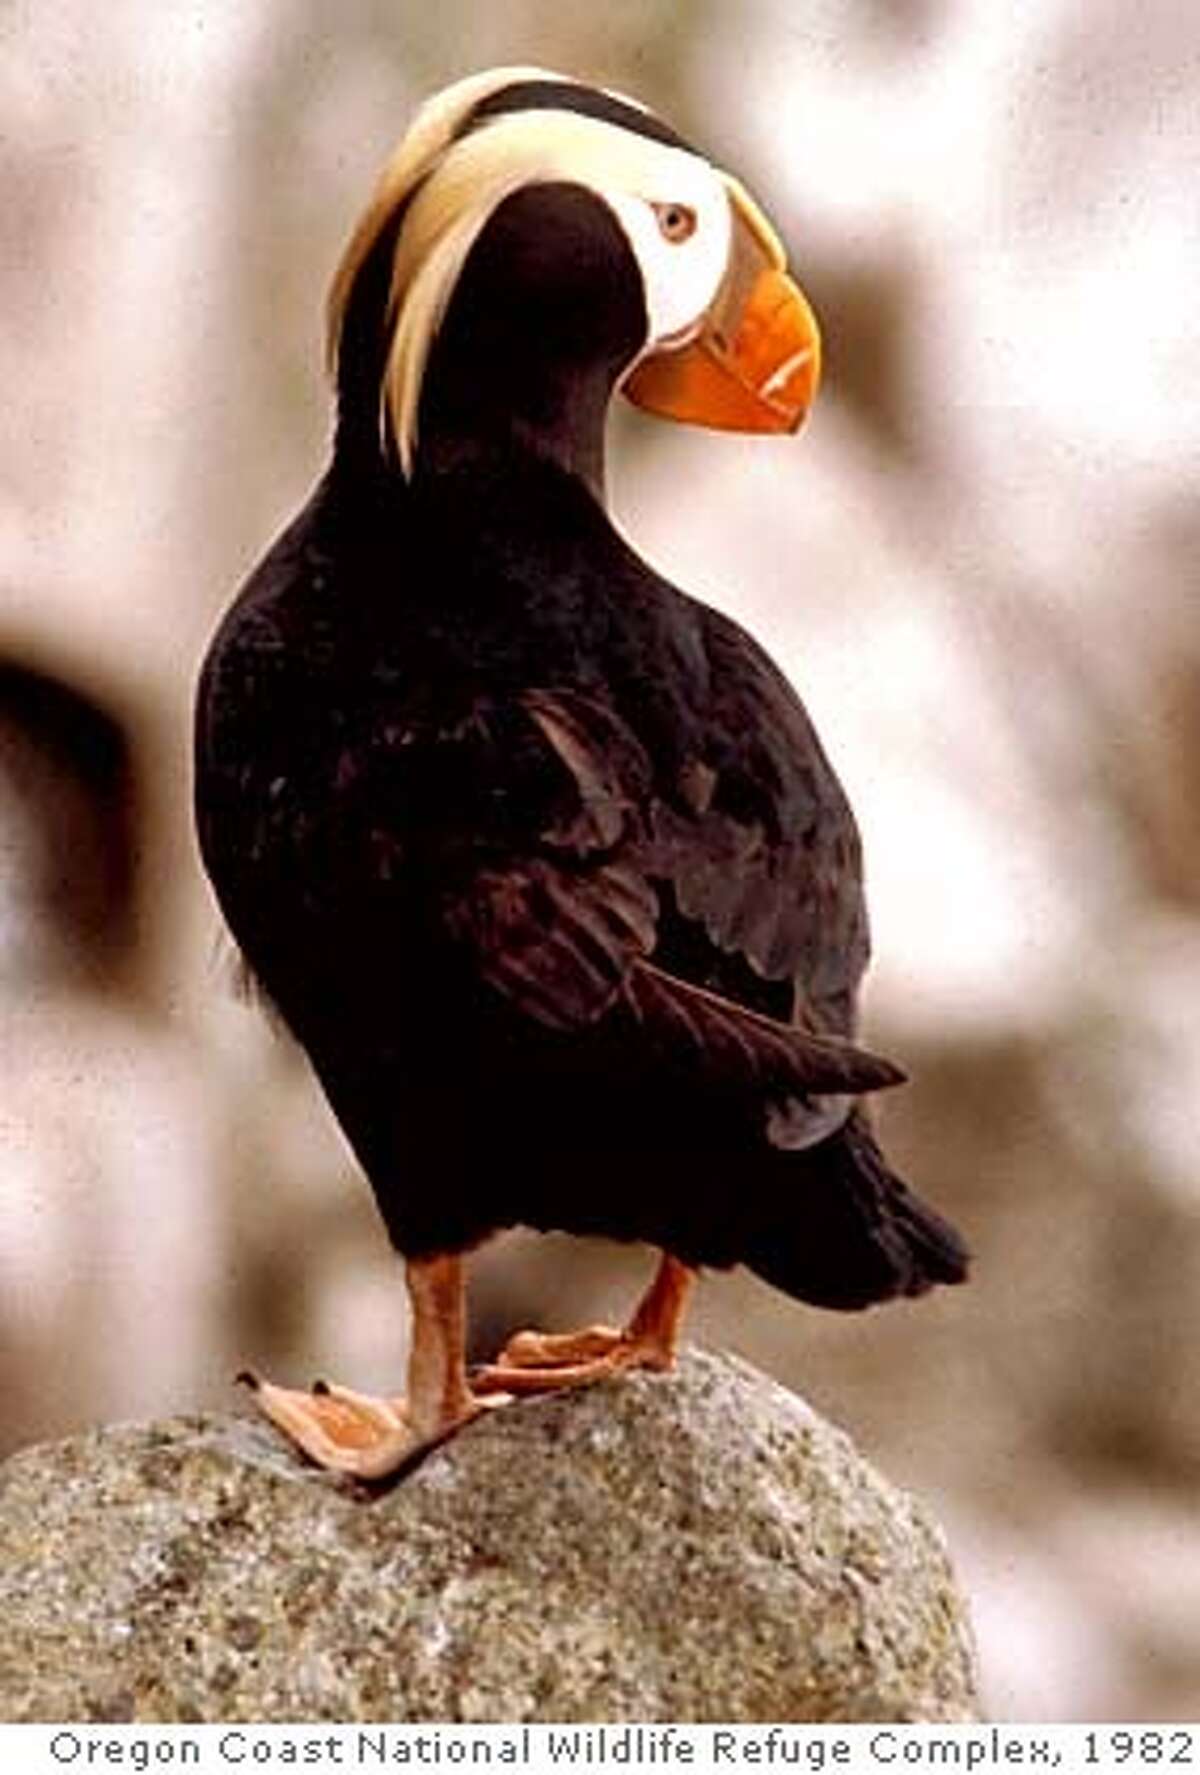 ** ADVANCE FOR THE WEEKEND OF DEC. 11-12 - FILE ** In this May 1982 photo released by the Oregon Coast National Wildlife Refuge Complex, a tufted puffin is shown on Southeast Farallon Island, California. (AP Photo/Oregon Coast National Wildlife Refuge Complex, Roy W. Lowe, File) OREGON COAST NATIONAL WILDLIFE REFUGE COMPLEX PHOTO MAY 1982 PHOTO RELEASED BY THE OREGON COAST NATIONAL WILDLIFE REFUGE COMPLEX